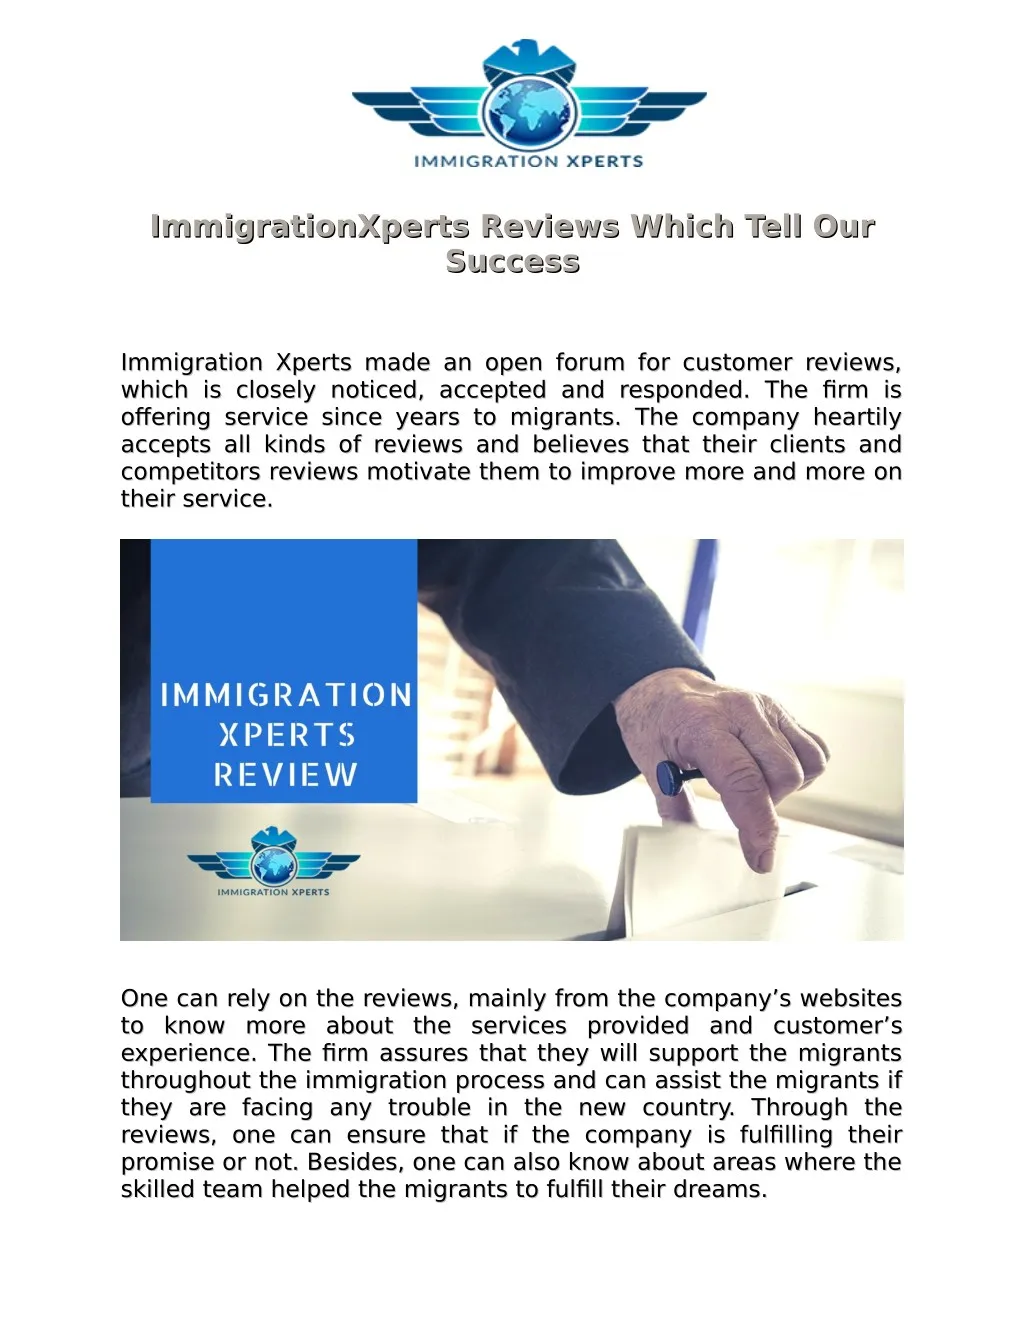 immigrationxperts reviews which tell